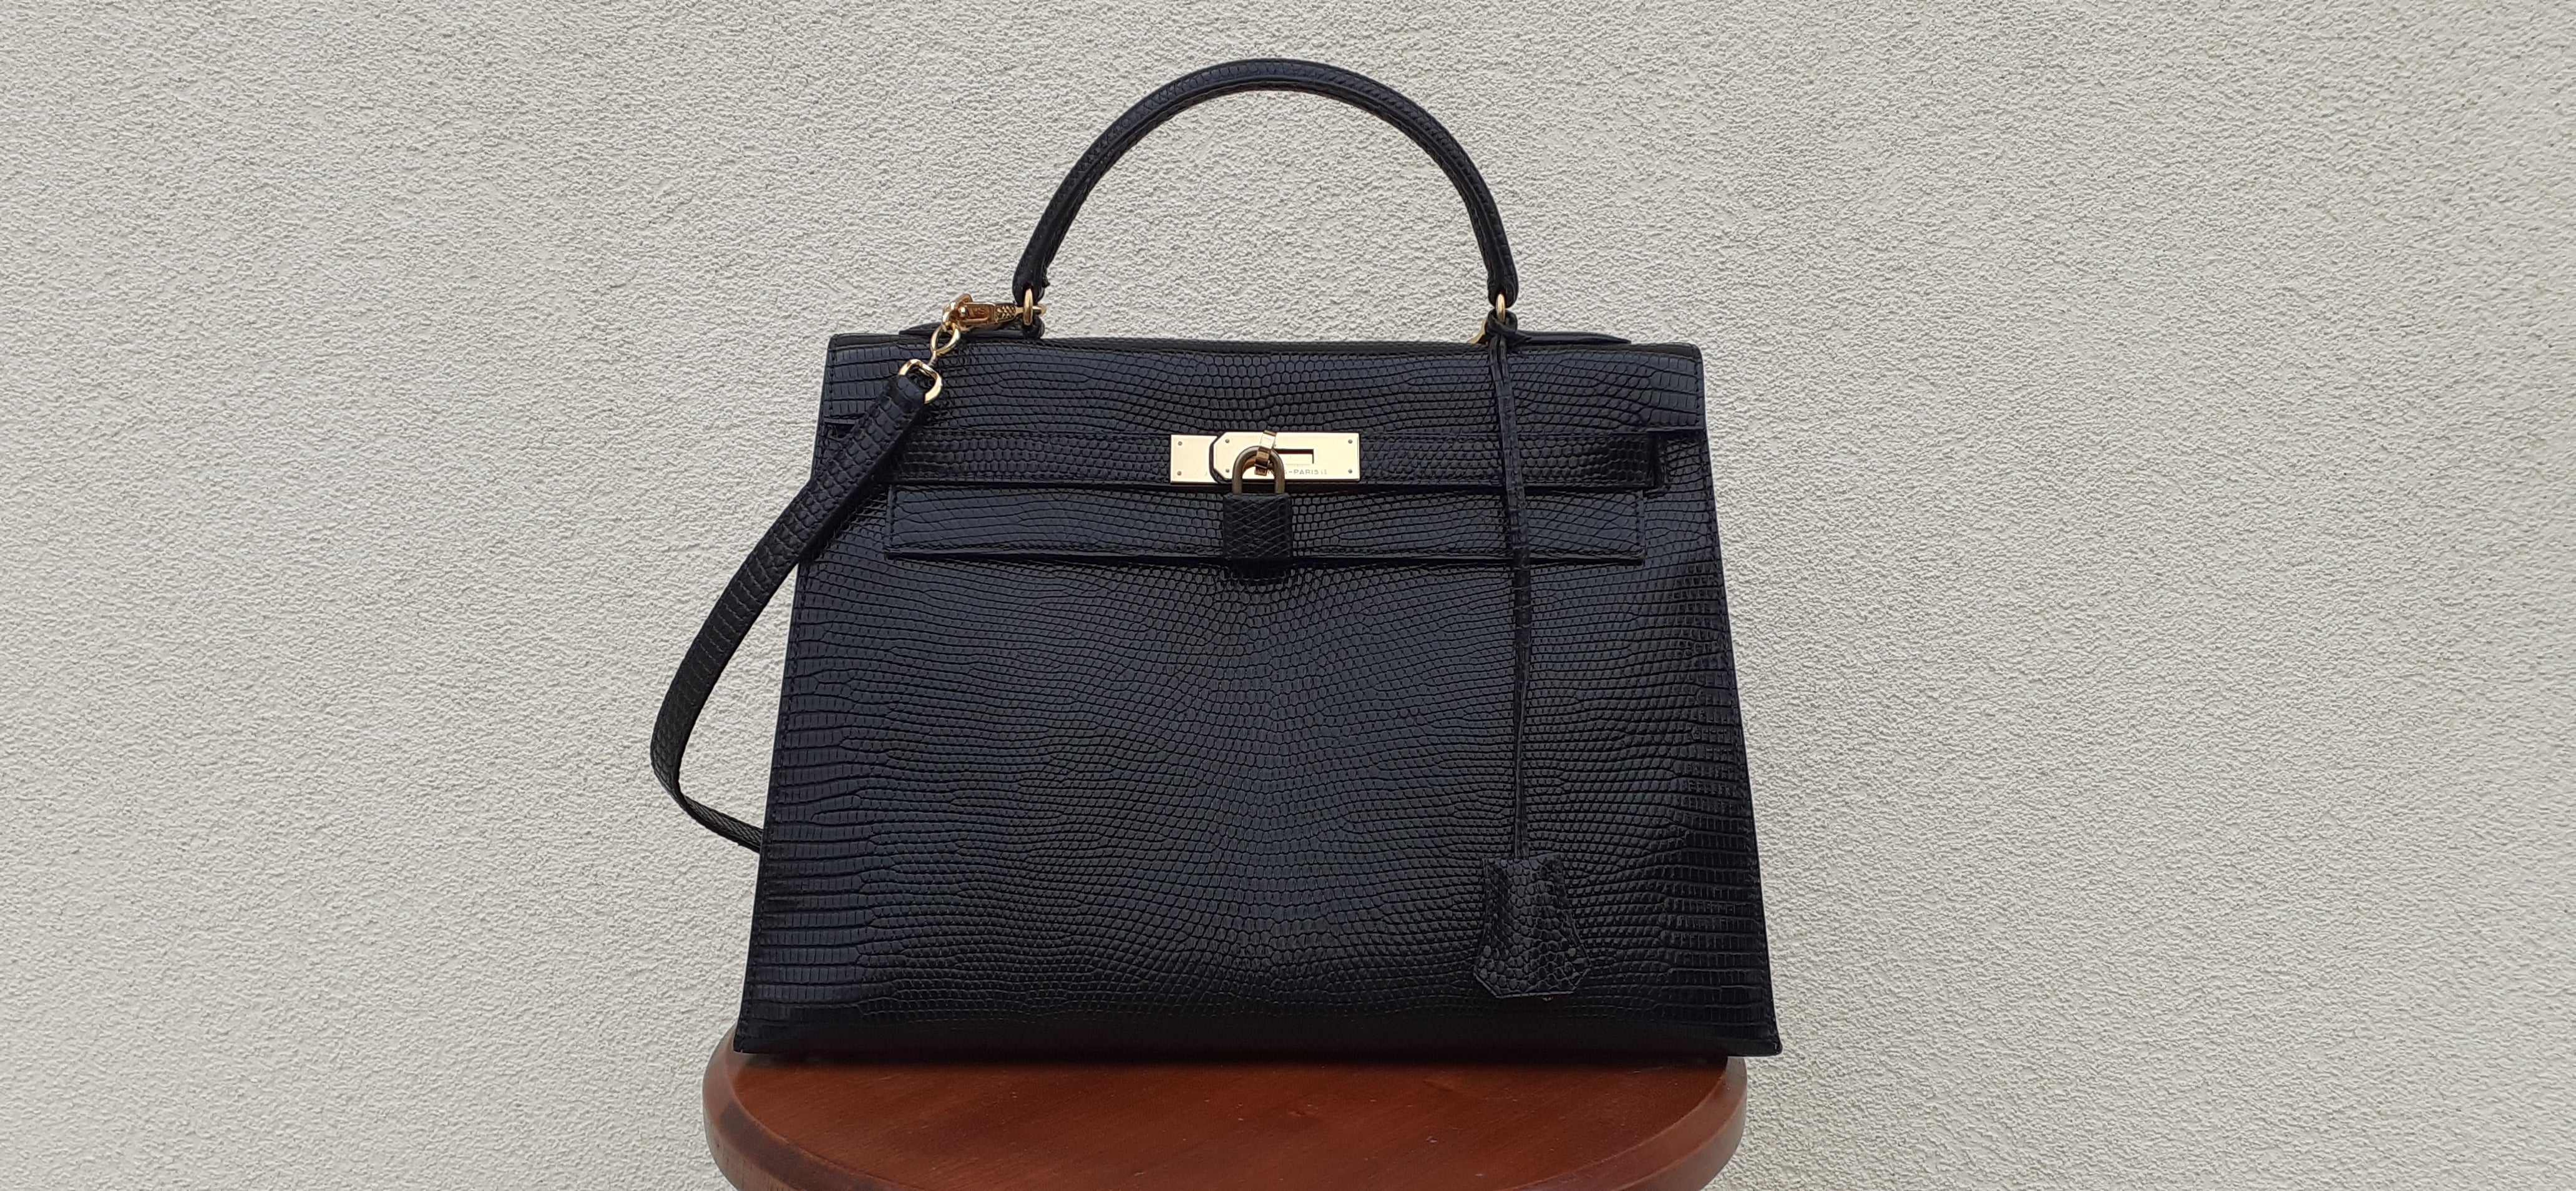 Rare opportunity to get an amazing and gorgeous Authentic Hermès Bag

